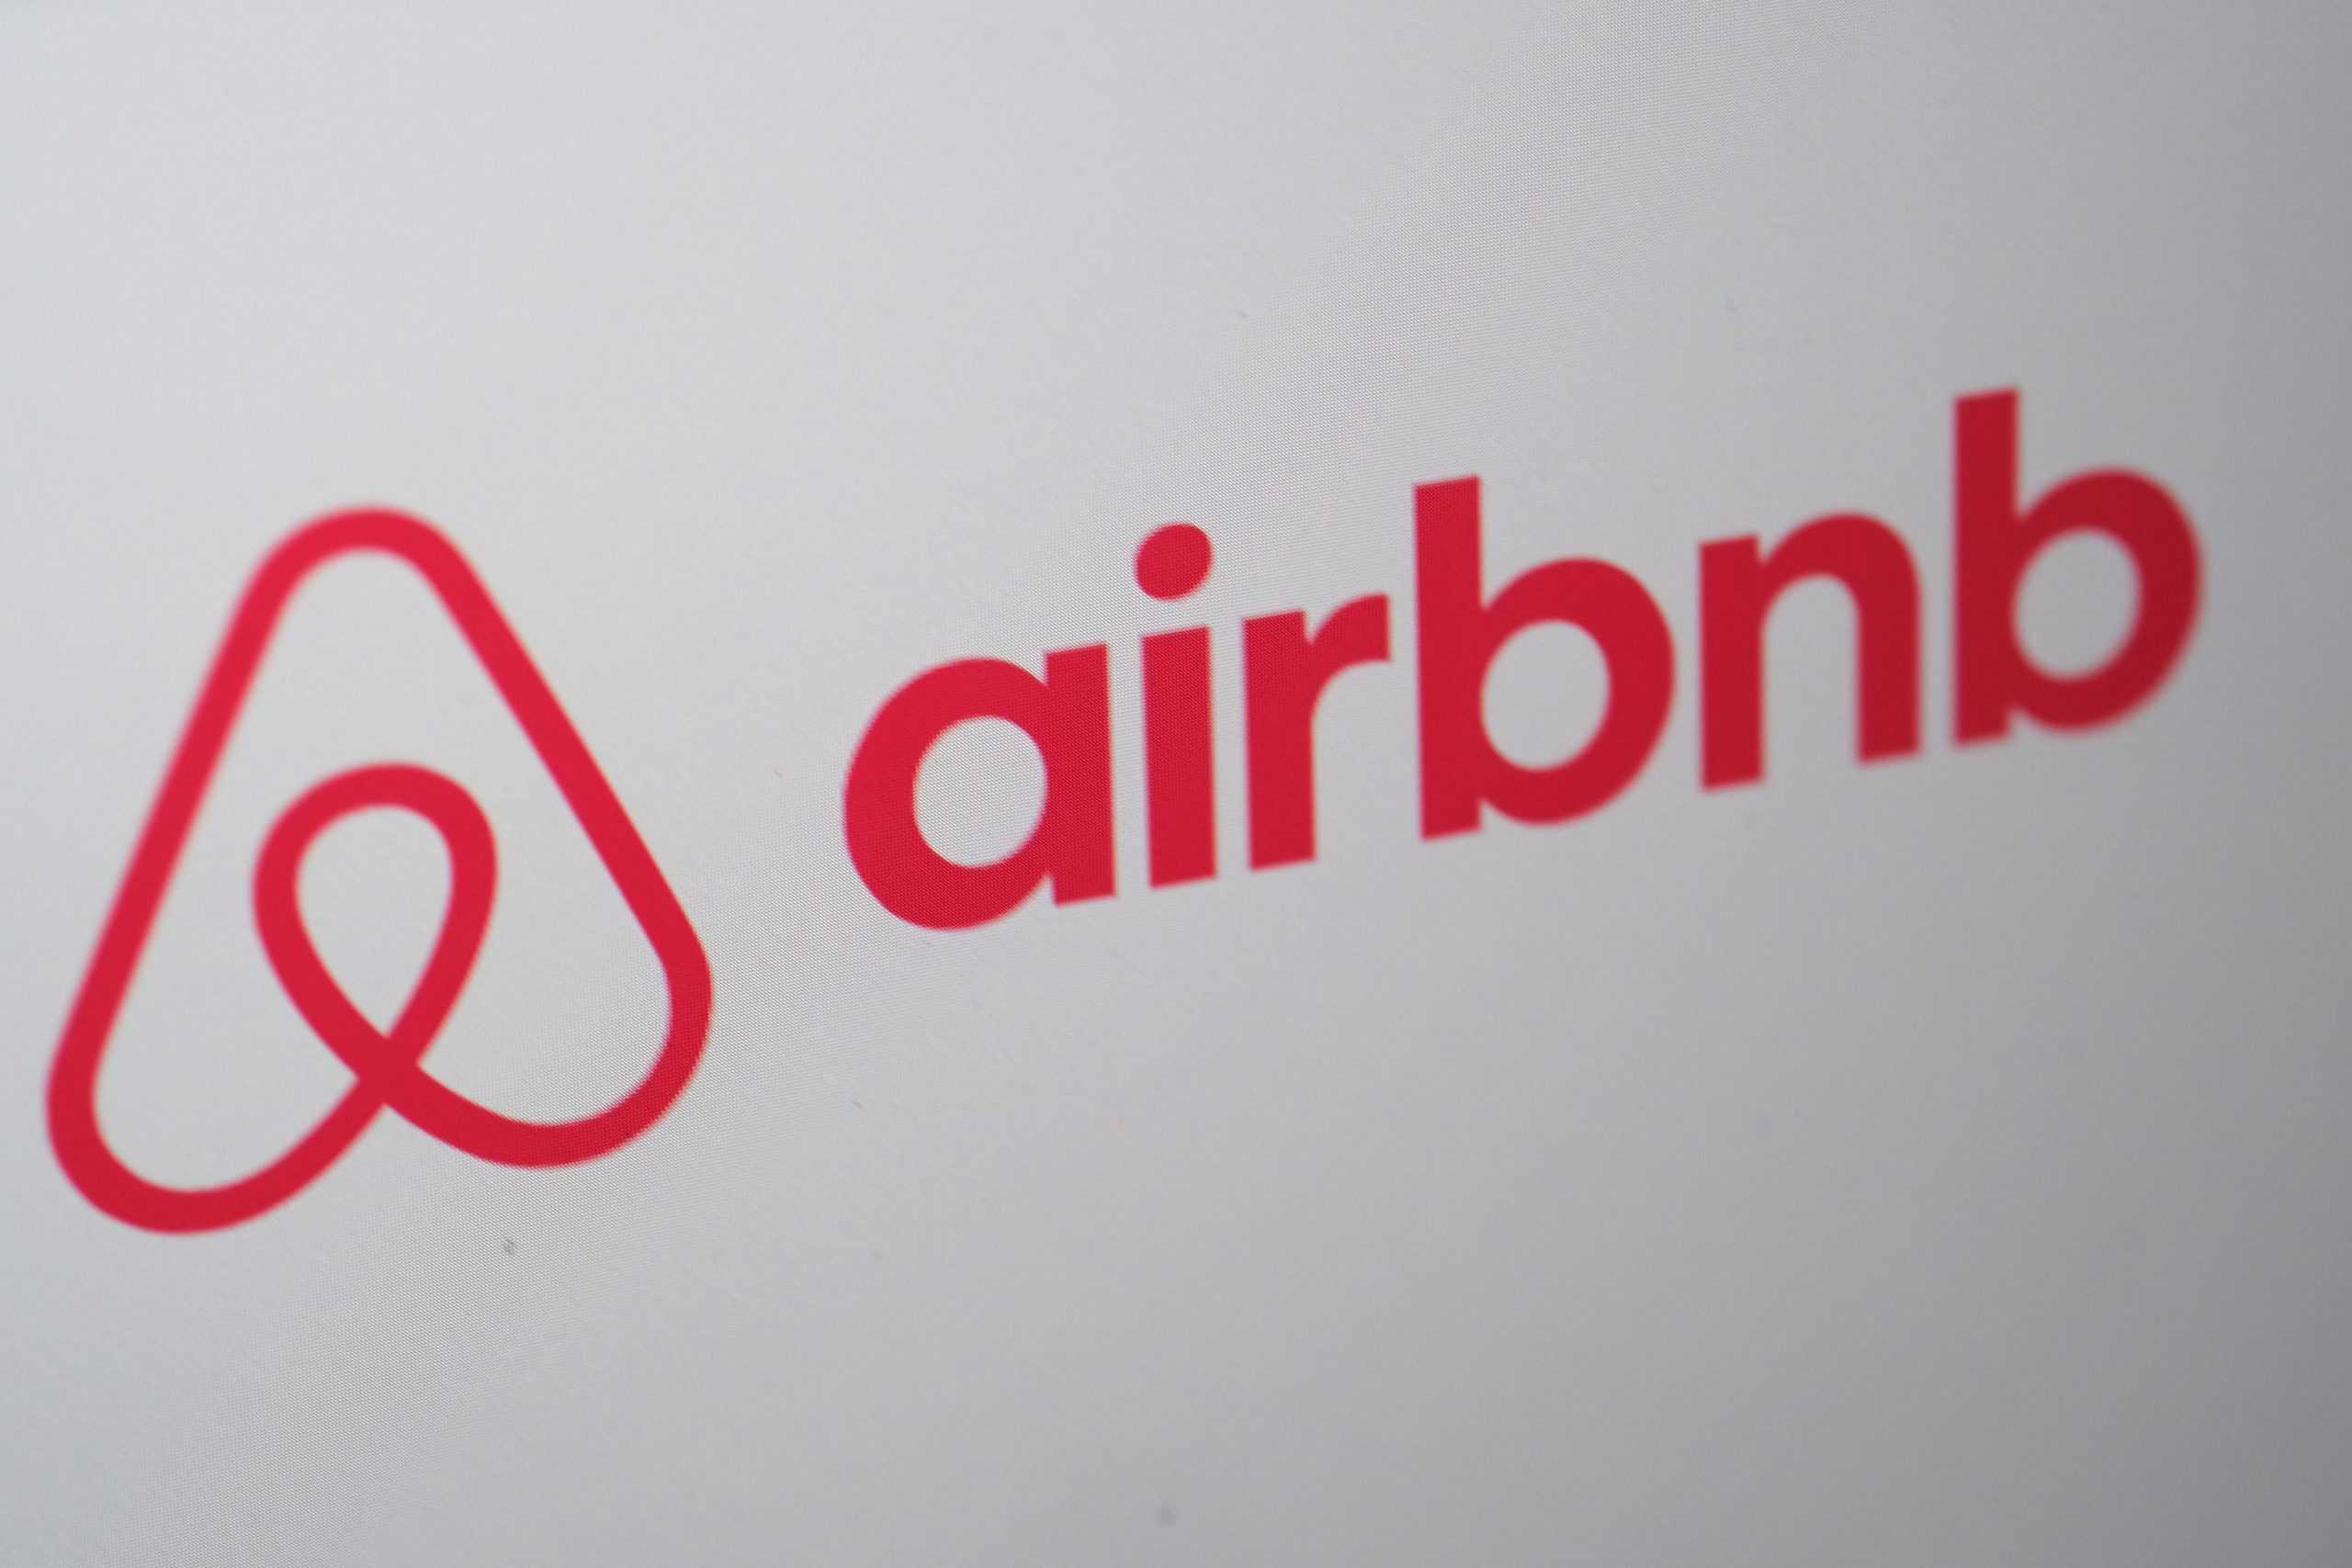 Aibnb's red logo on a white background.